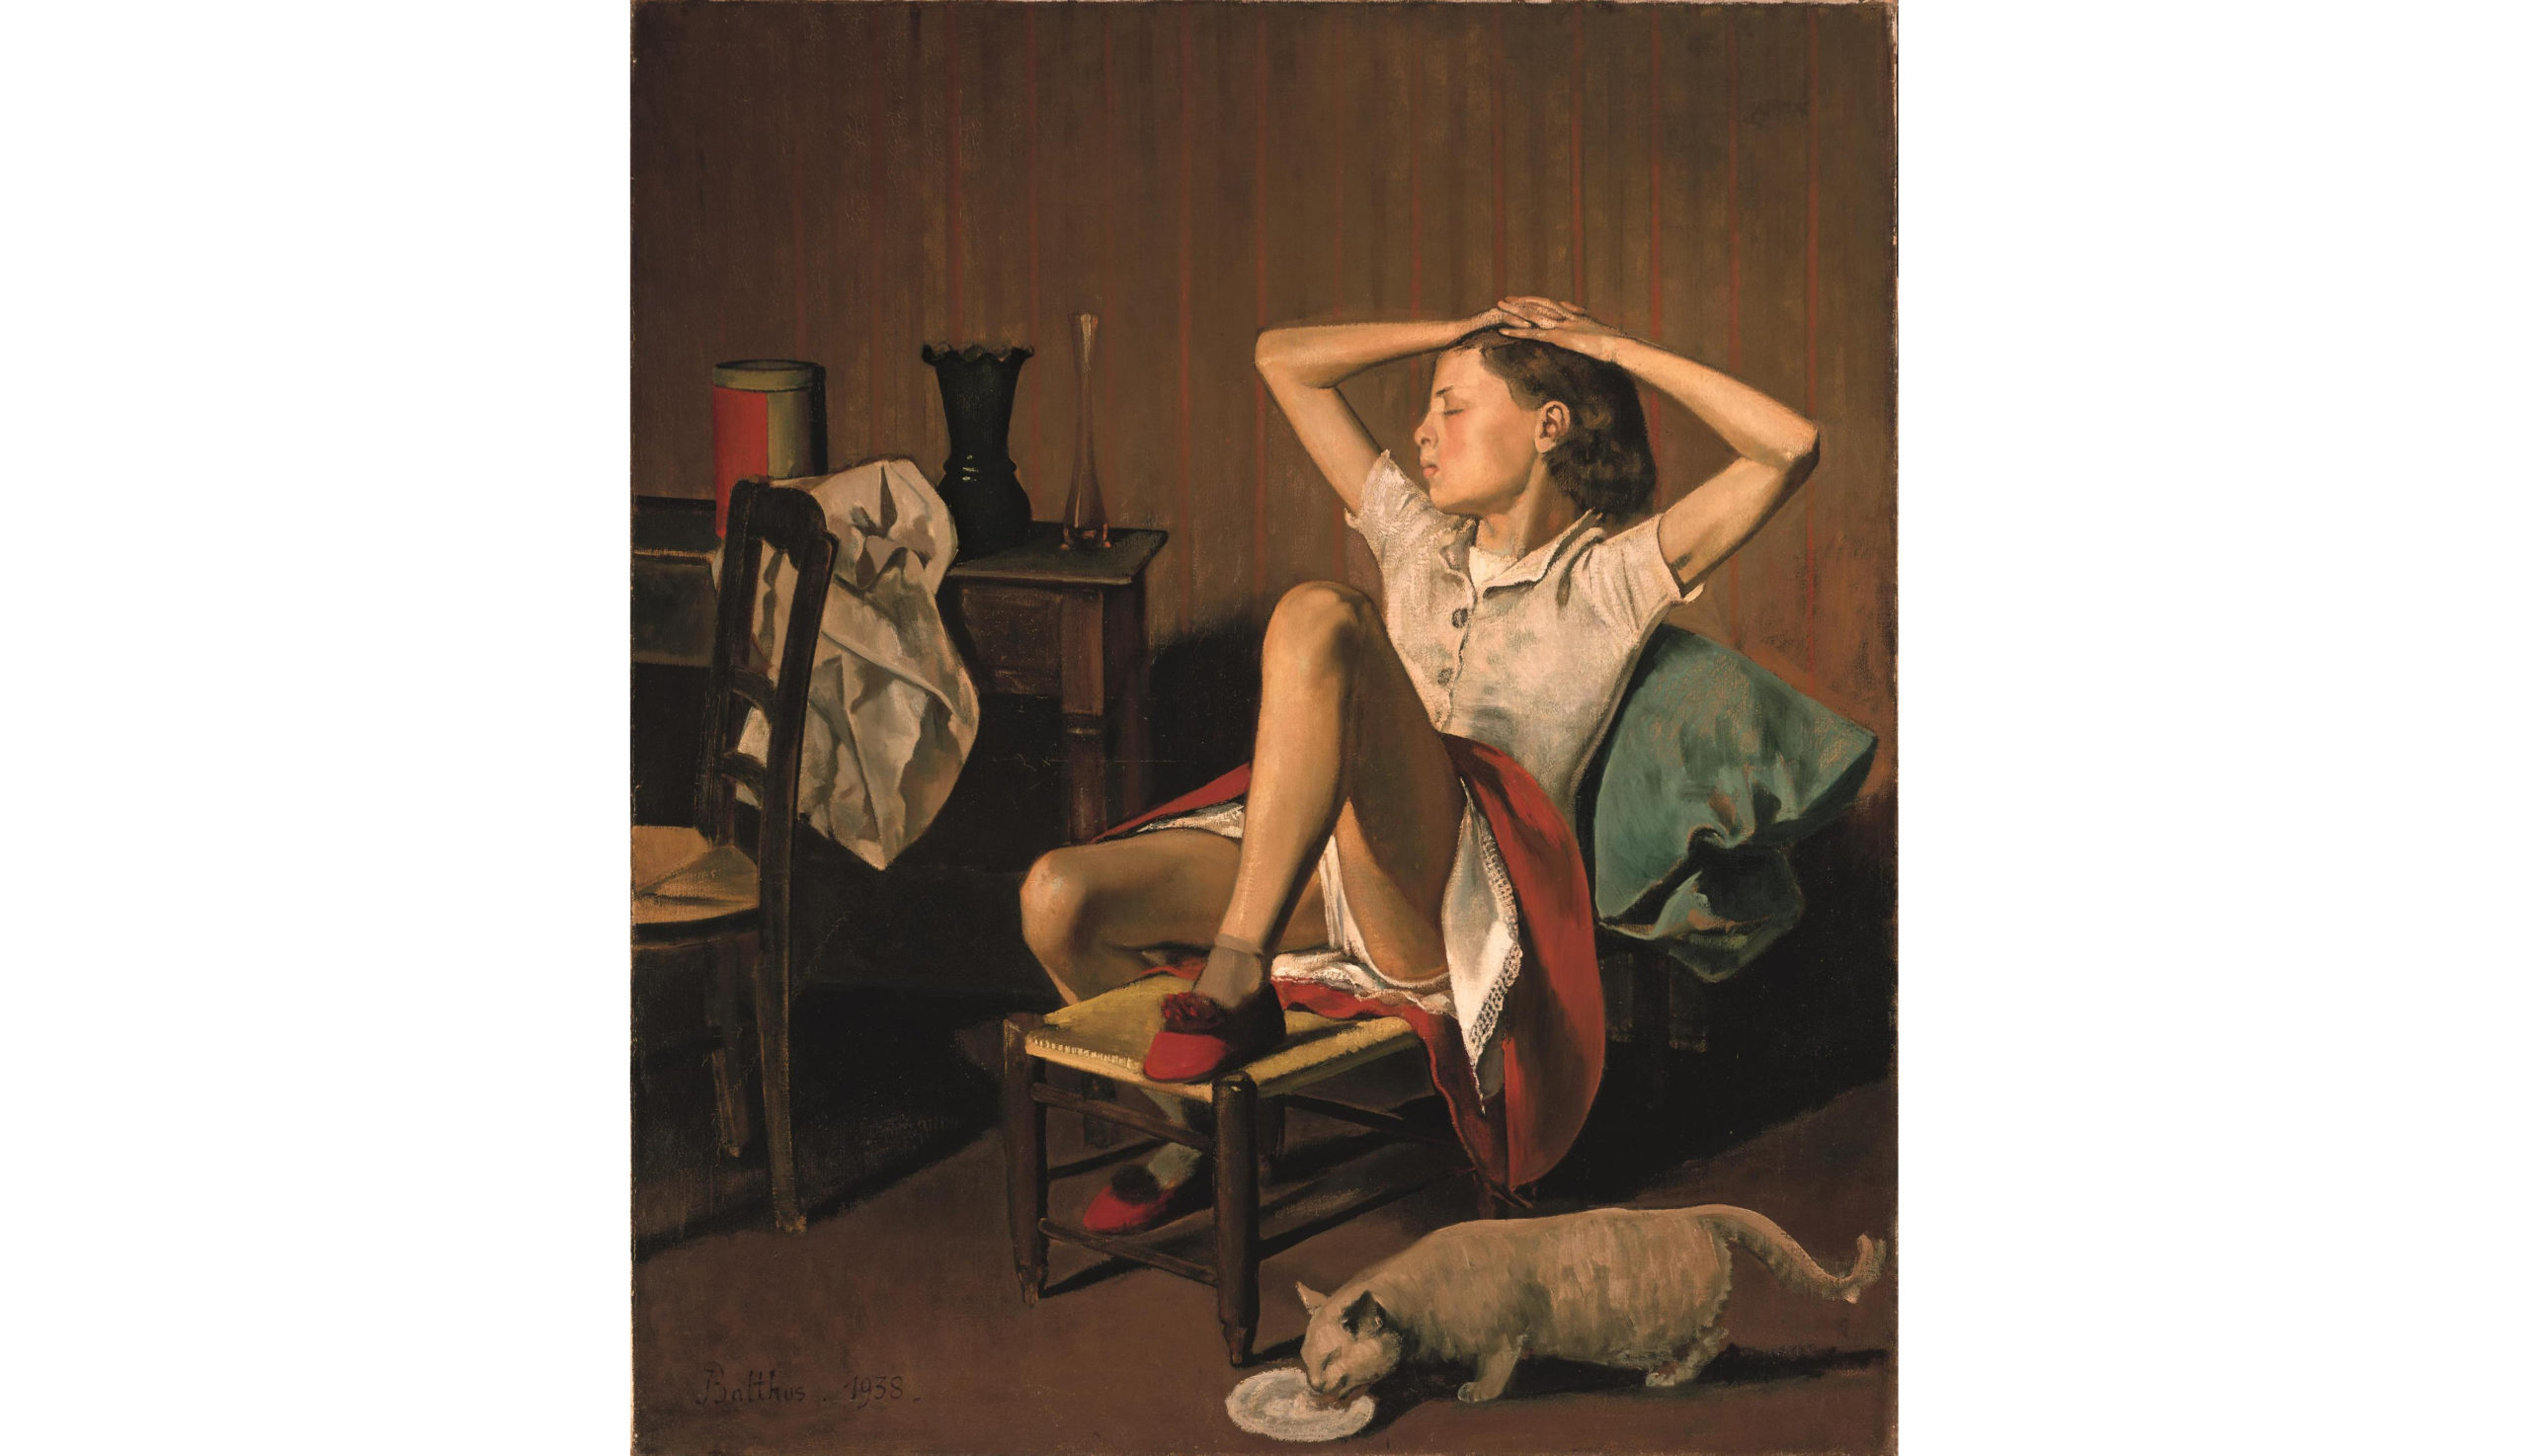 A warning about the Balthus warning